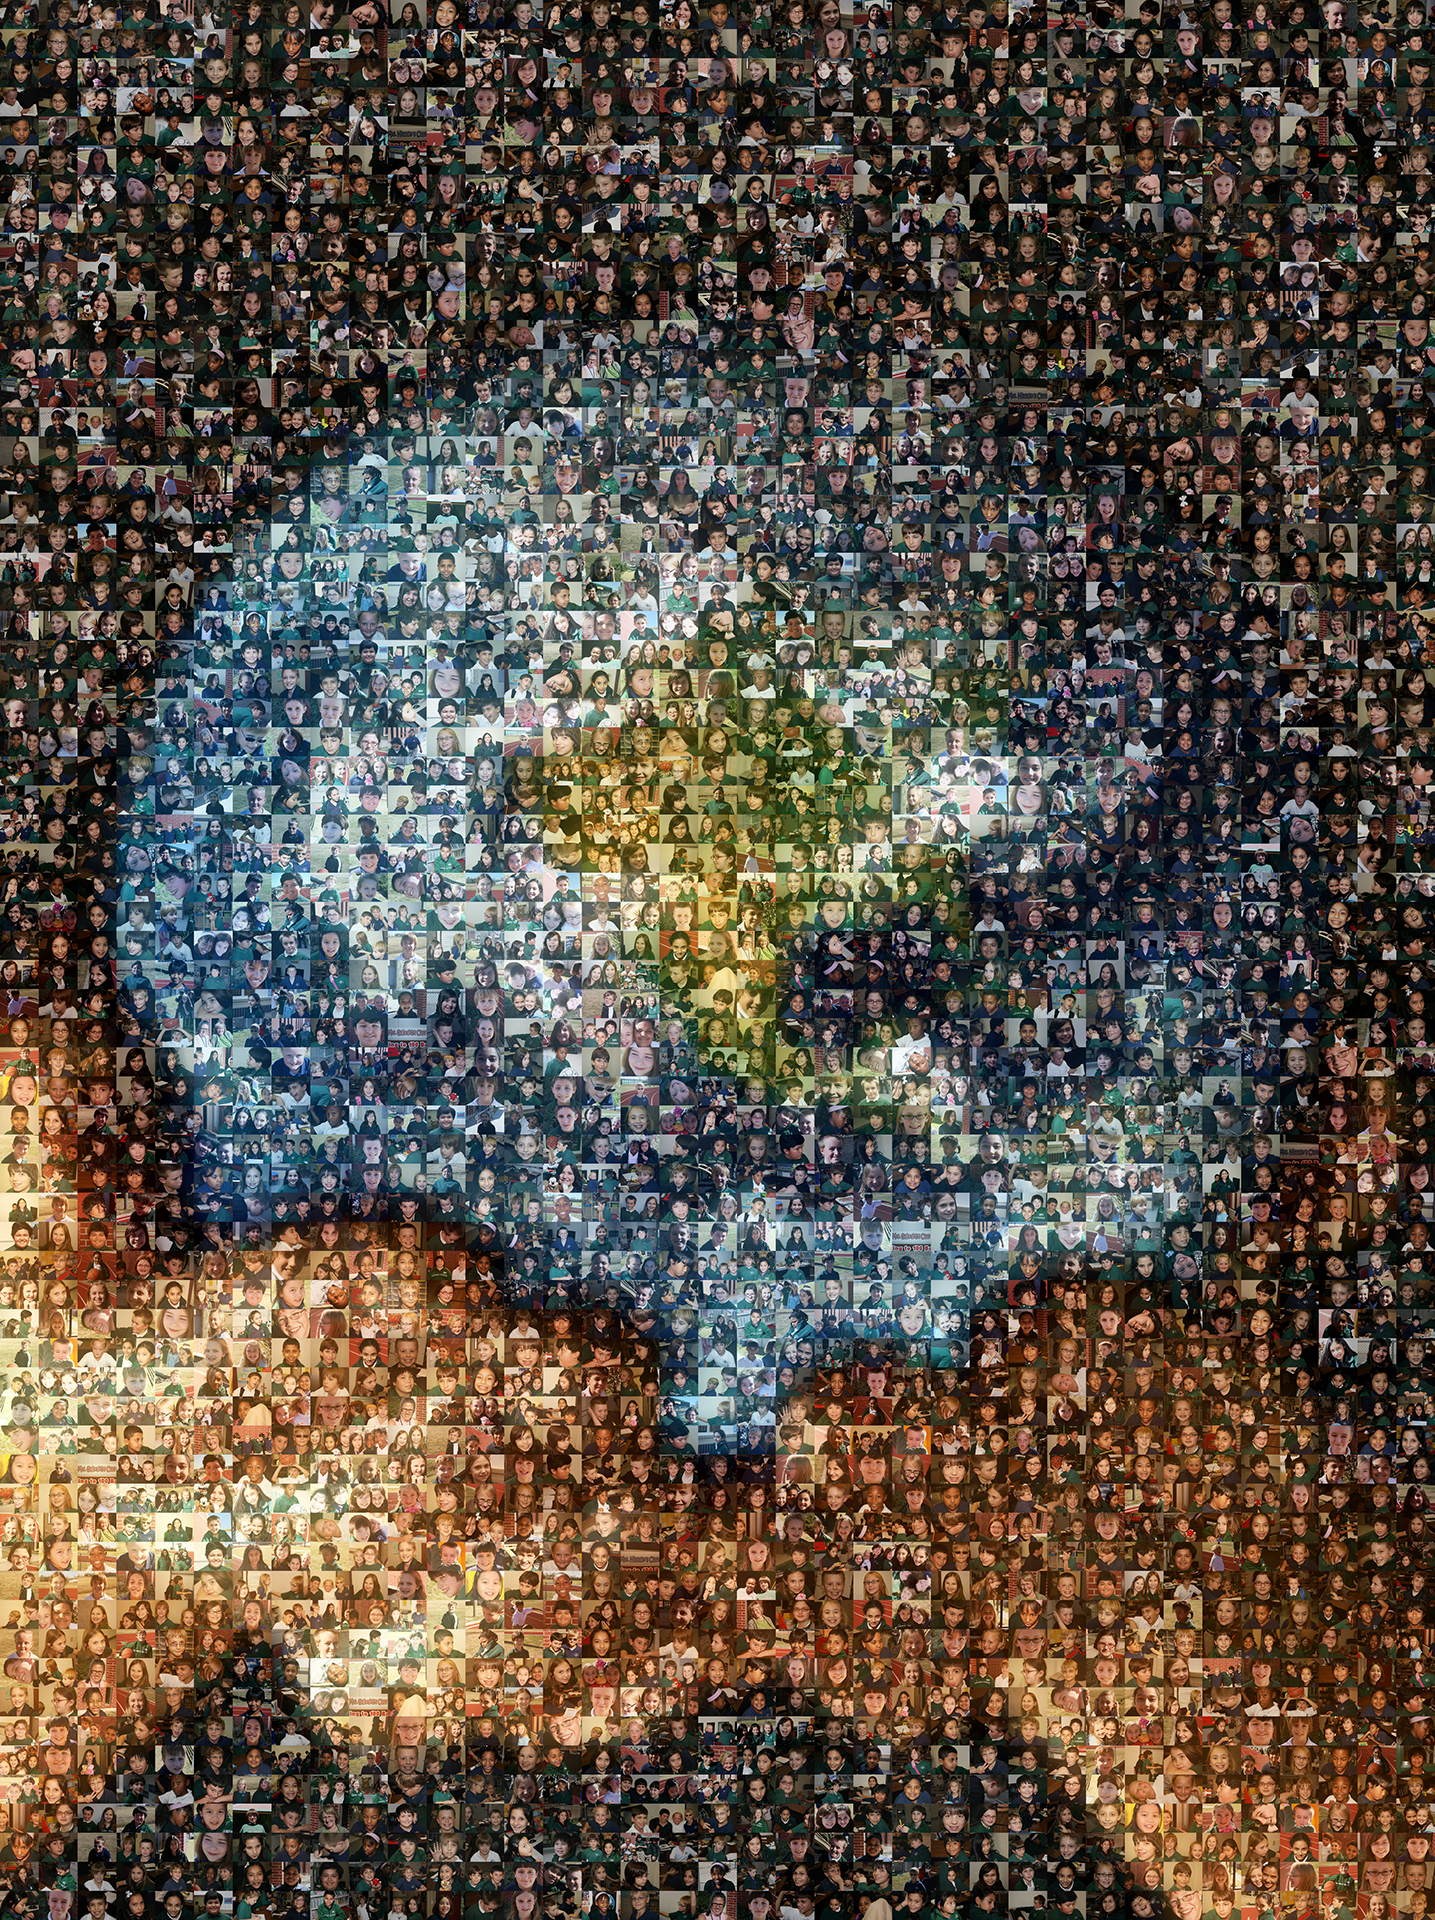 Picture Mosaics - Hands holding the World Photo Mosaic